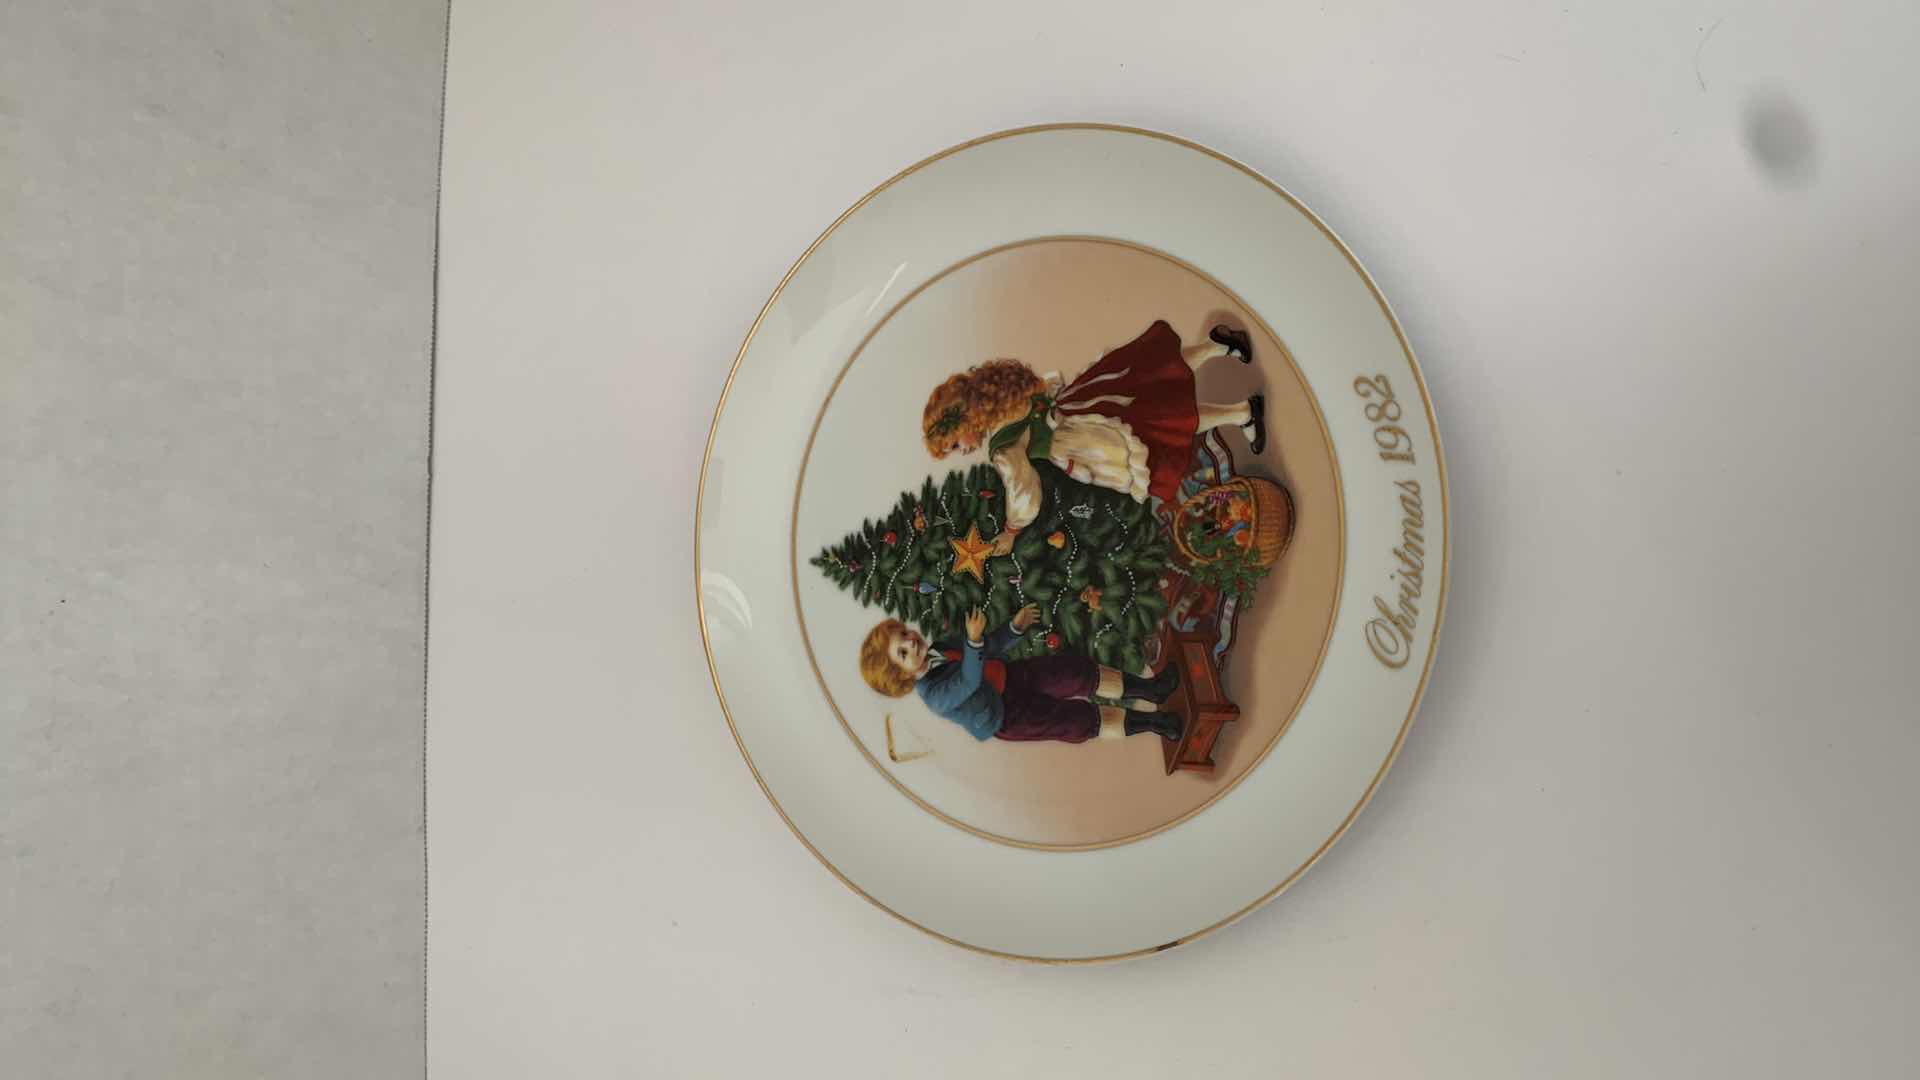 Photo 1 of AVON PRODUCTS “KEEPING THE CHRISTMAS TRADITION” PLATE 9” WIDE